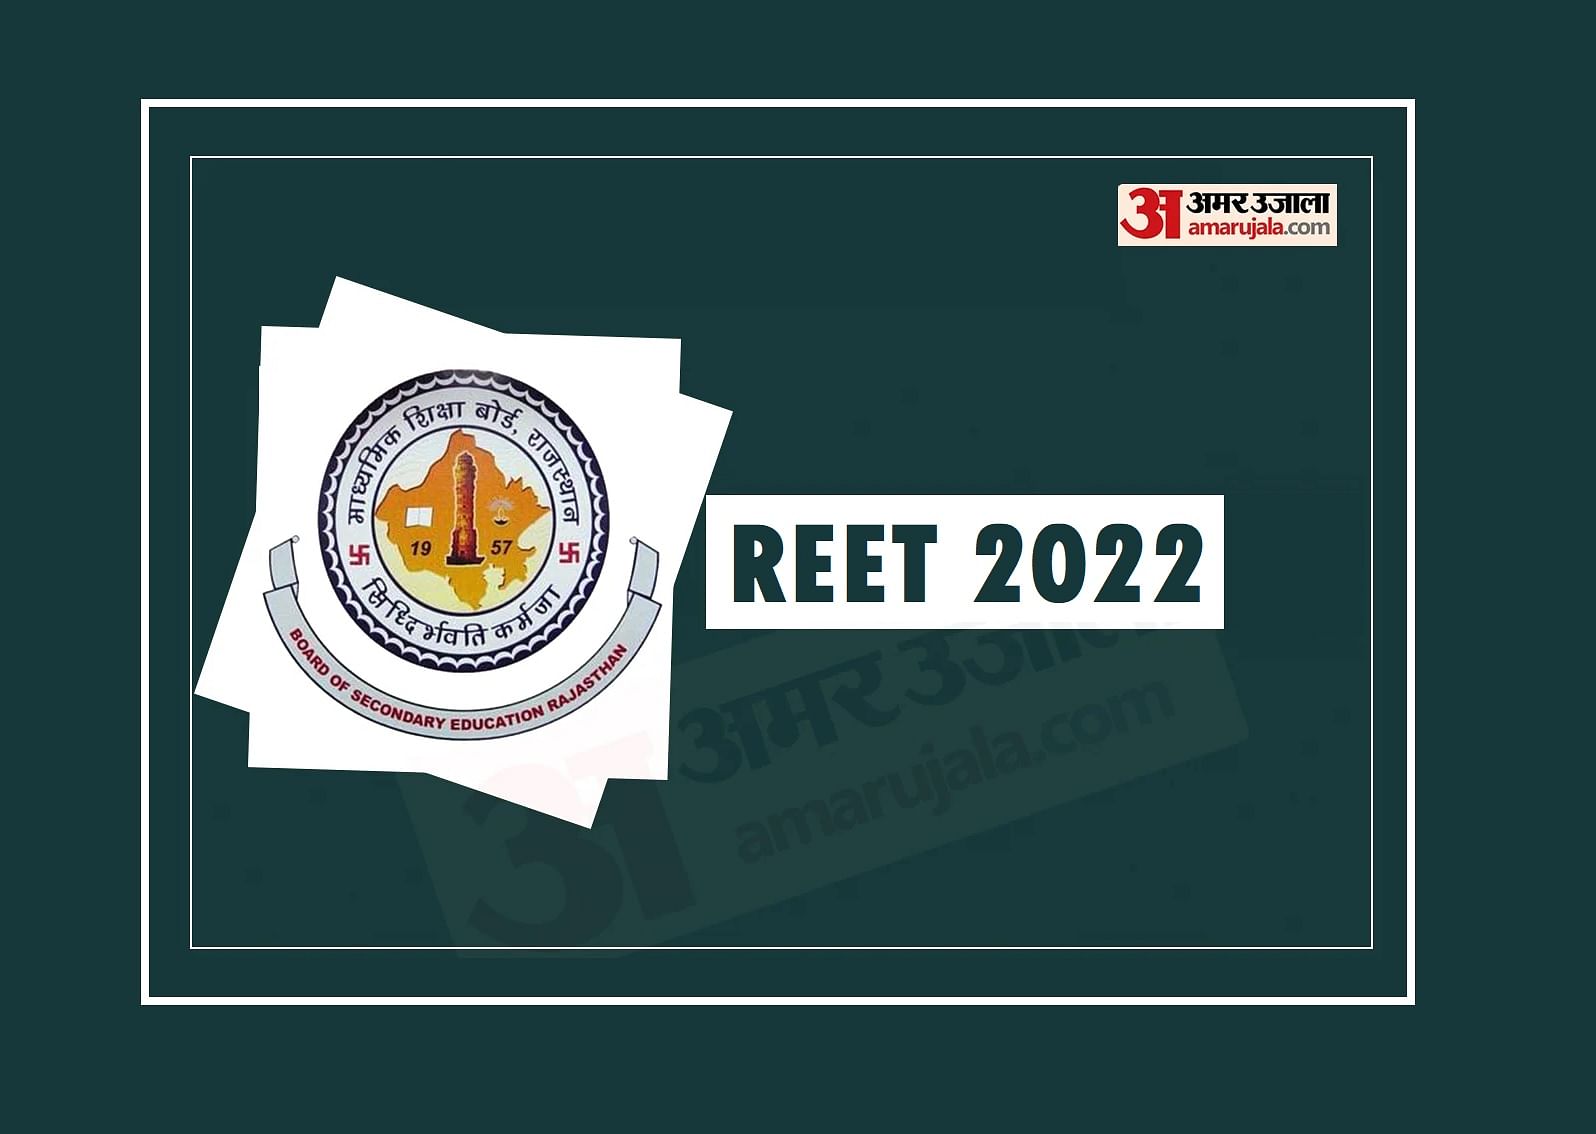 REET Answer Key 2022: Objection Window Closes Today, Steps to Raise Challenges Here